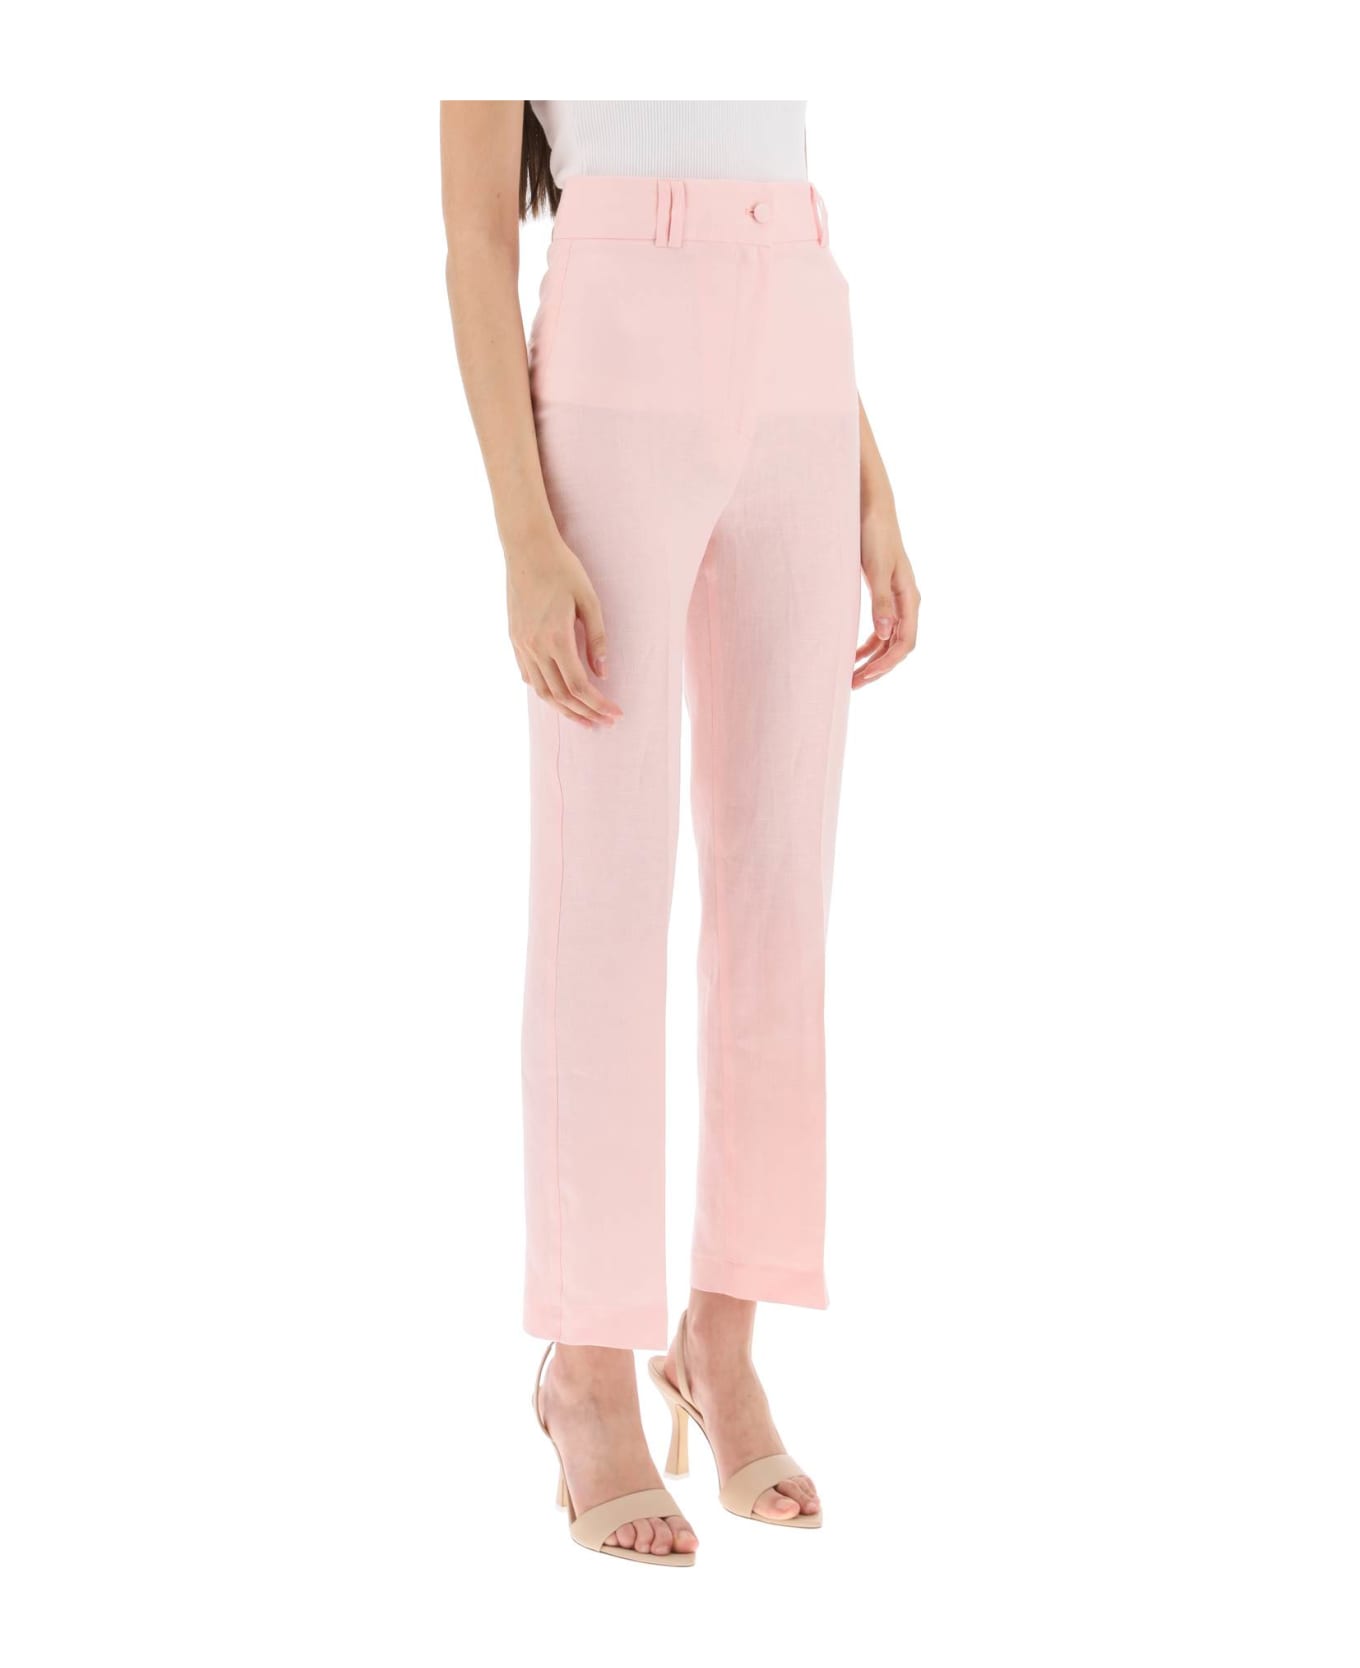 Hebe Studio 'loulou' Linen Trousers - PINK CALYPSO (Pink) ボトムス